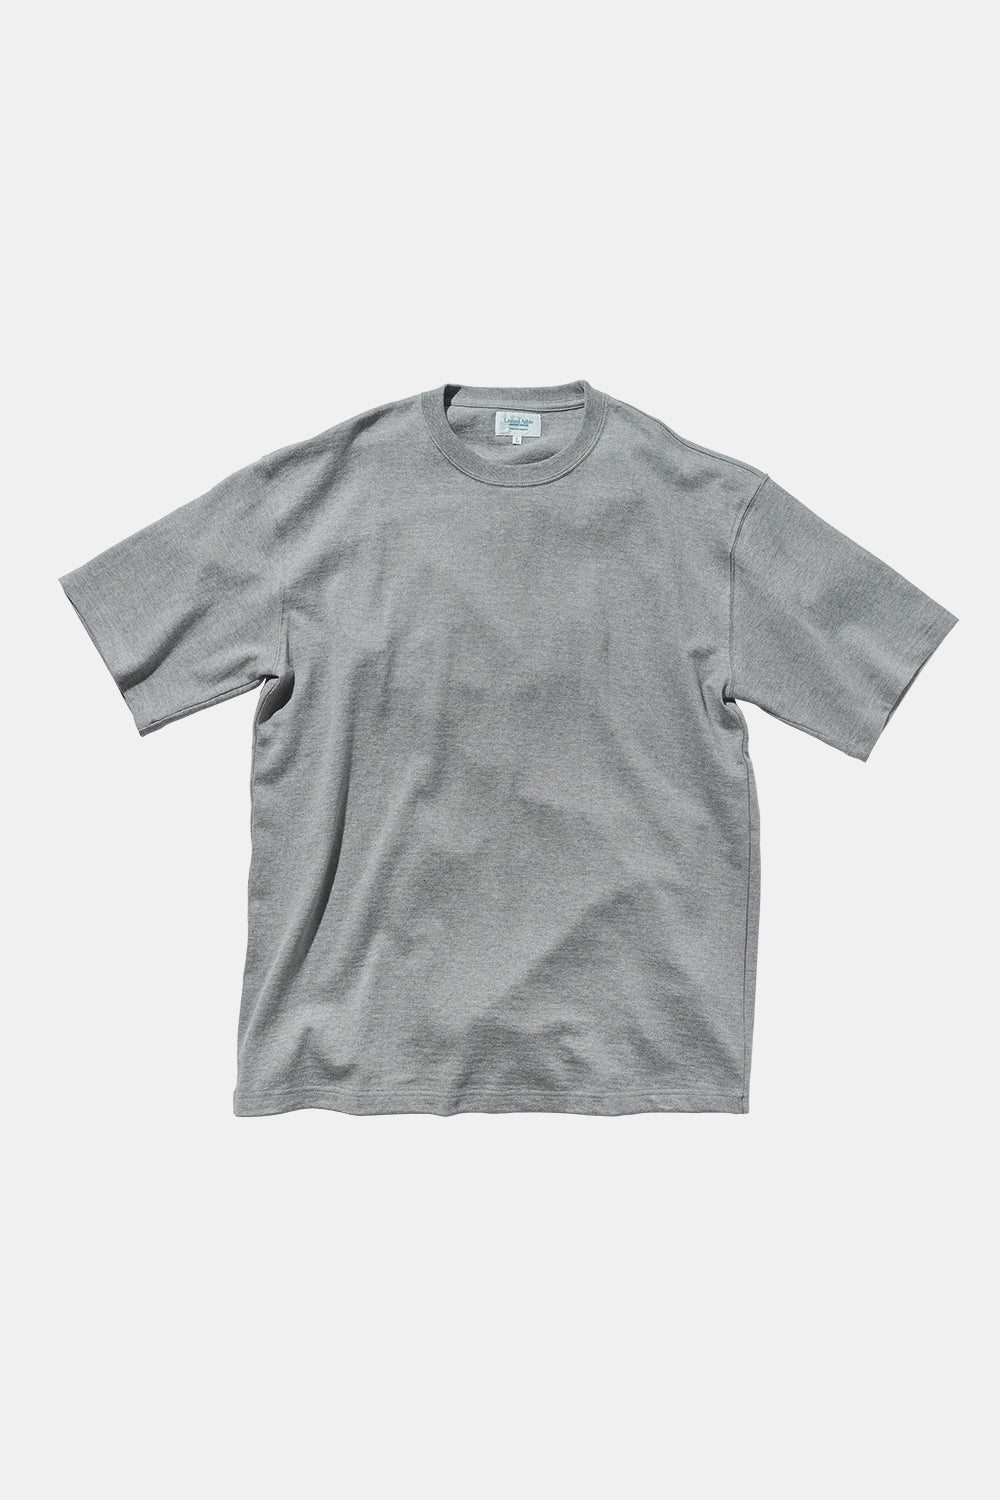 United Athle Japan Made Wide Fit T-shirt (Grey)